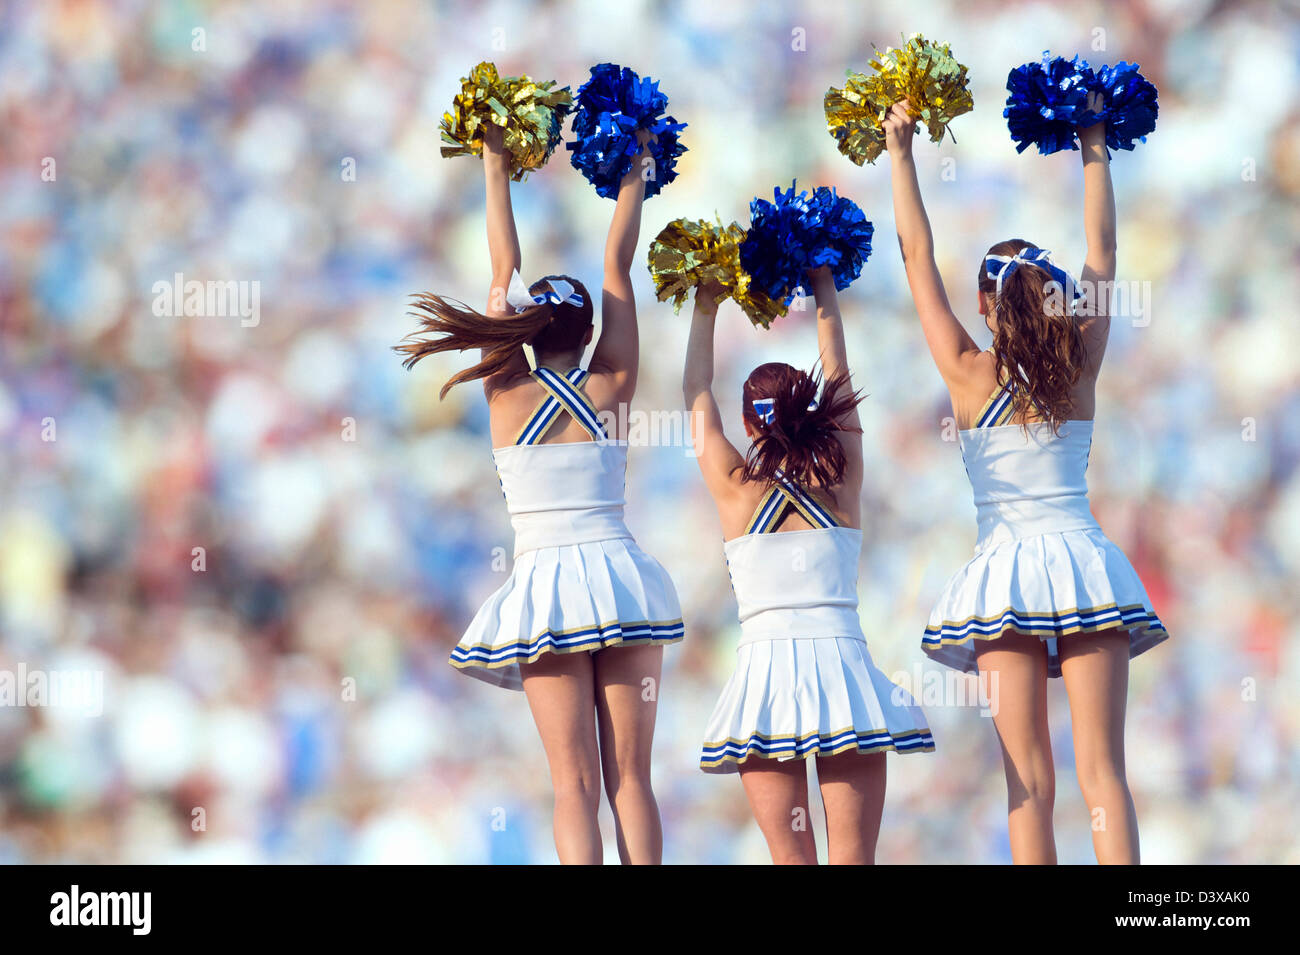 Caucasian cheerleaders posing together Banque D'Images